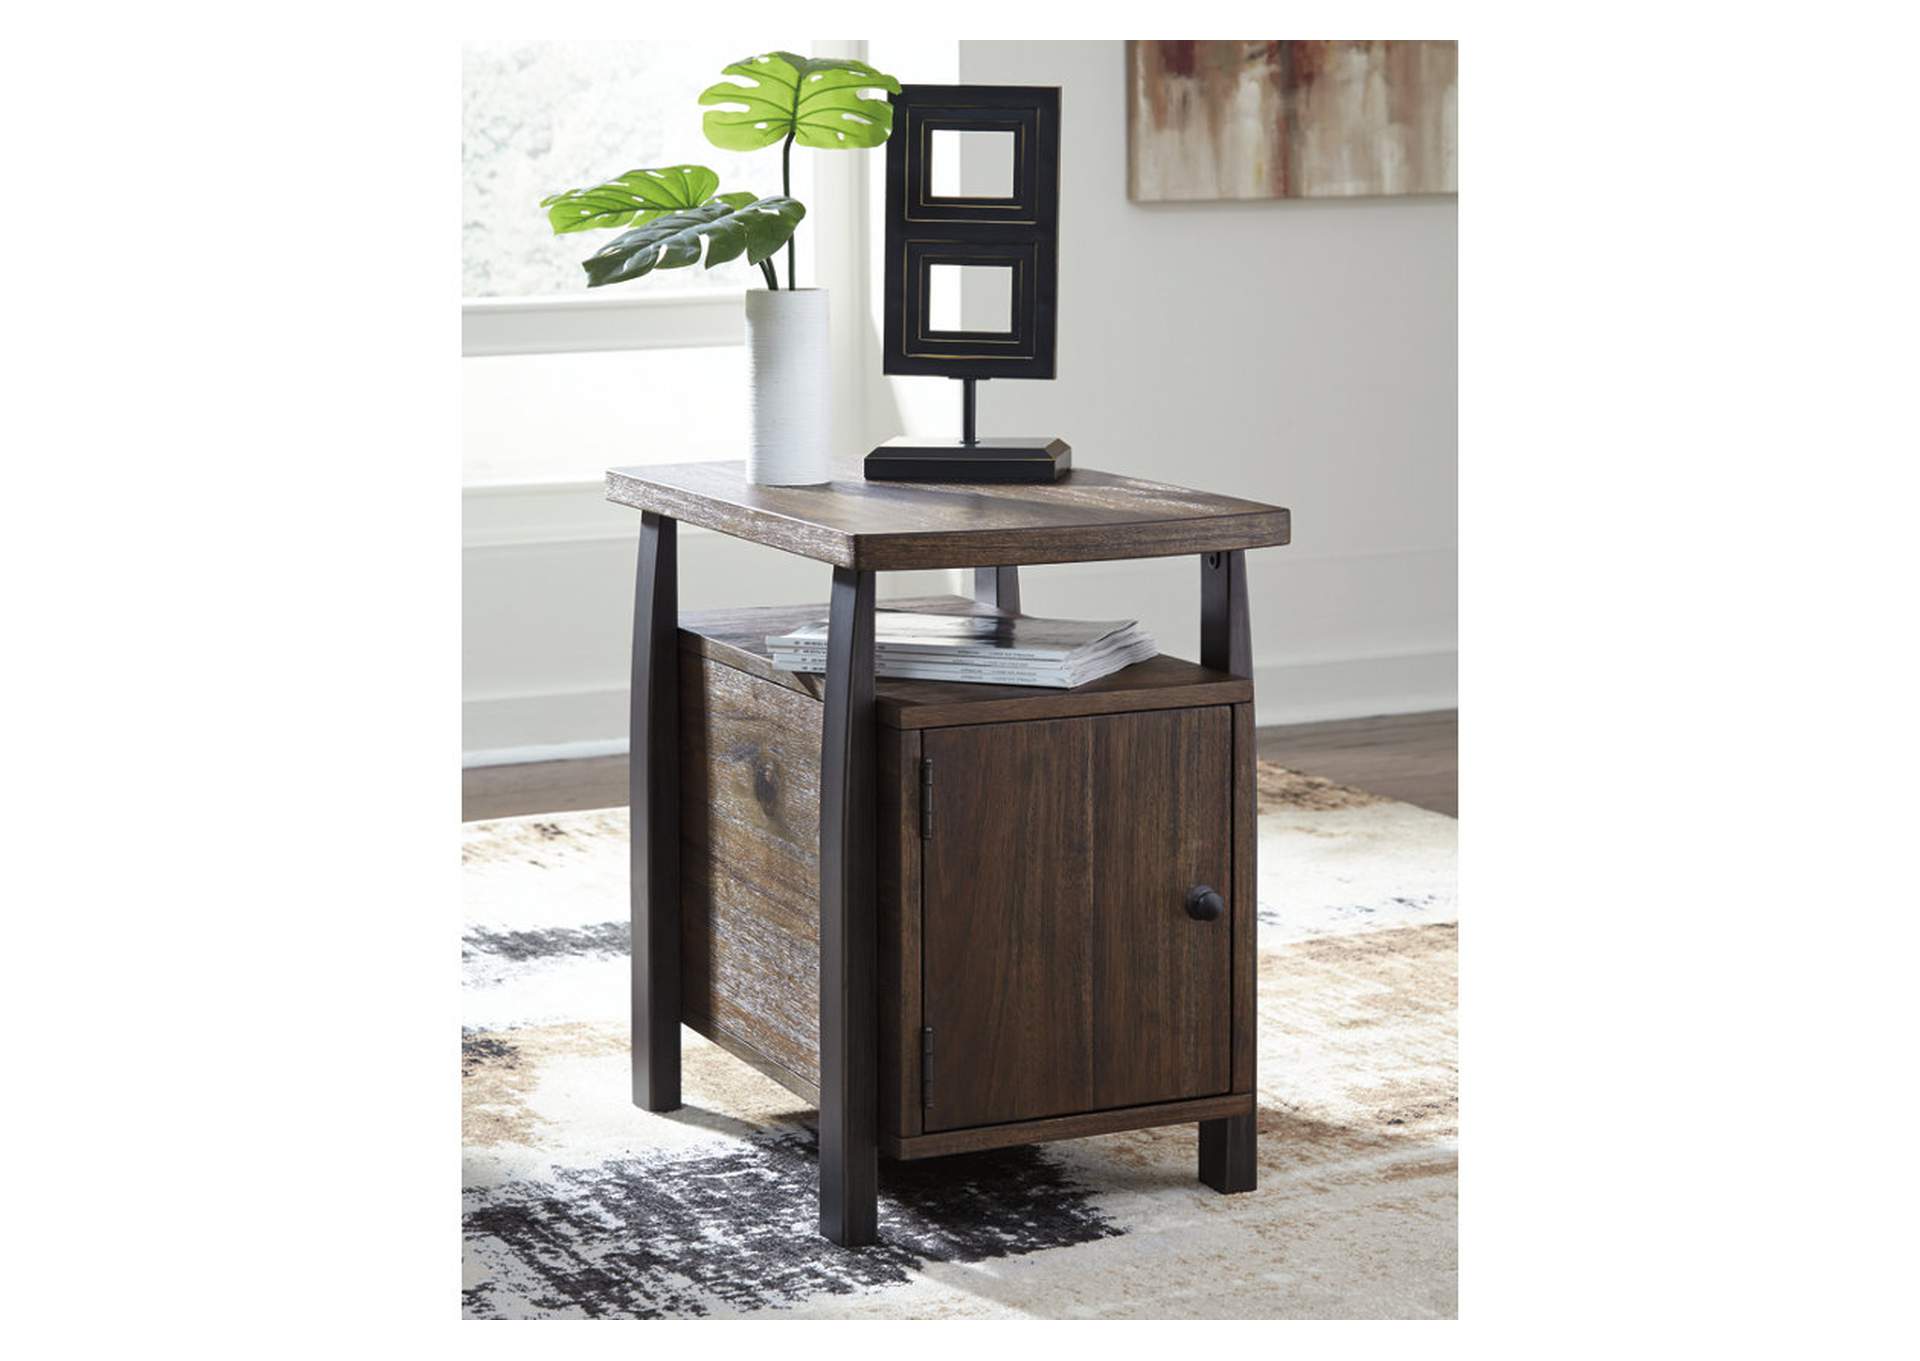 Vailbry Chairside End Table,Direct To Consumer Express